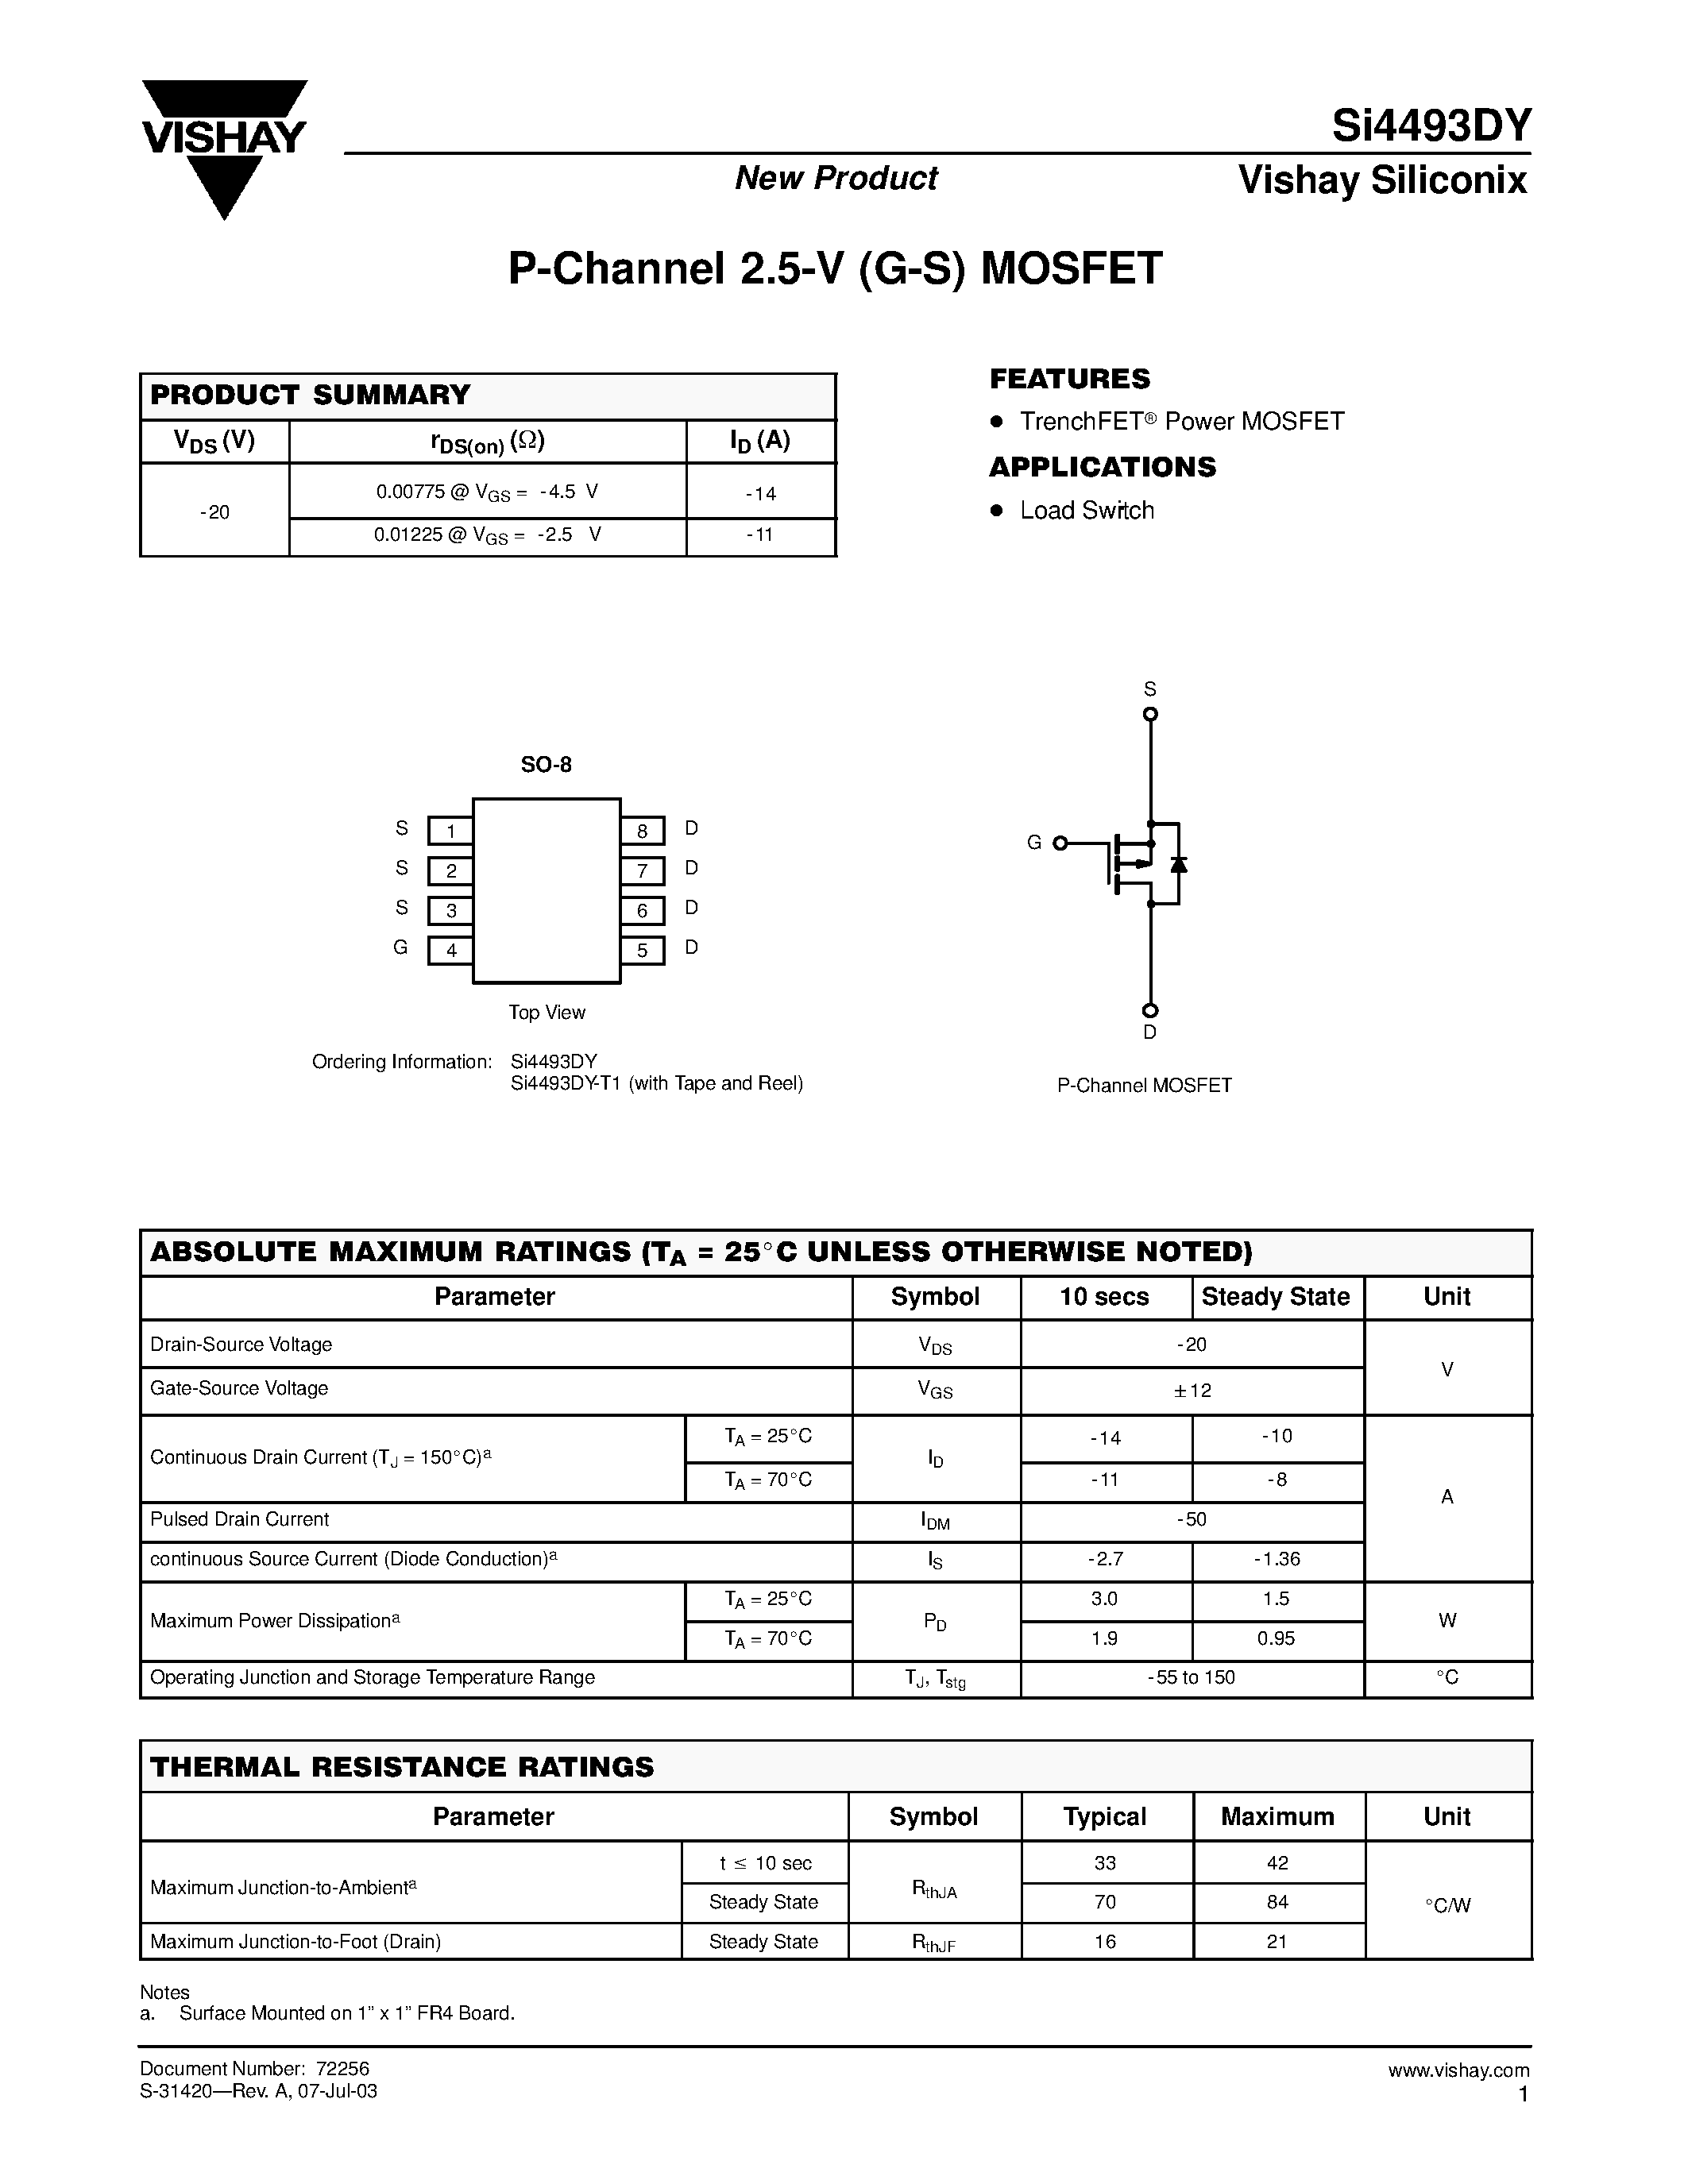 Даташит SI4493DY - P-Channel 2.5-V (G-S) MOSFET страница 1